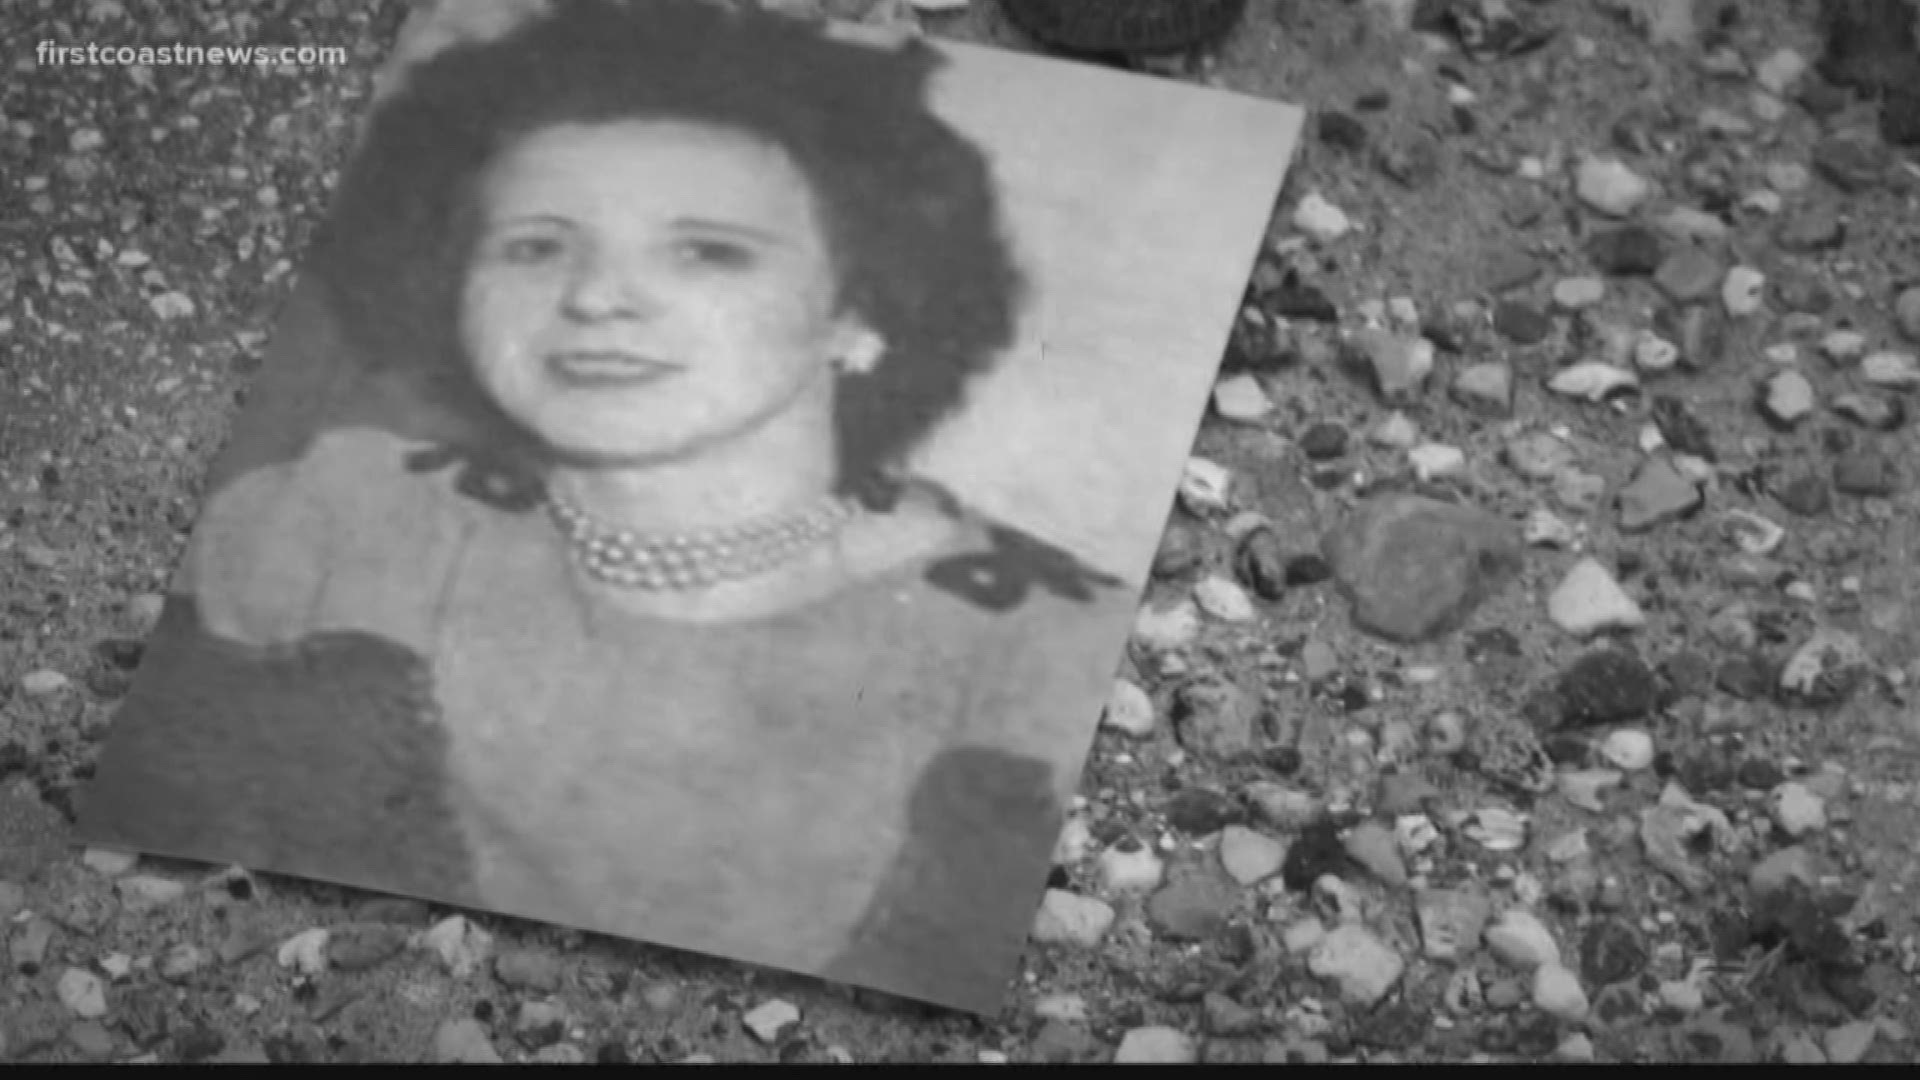 Pearle Bartley was born just before the turn of the last century, in 1897. She lived to be 72 years old before being brutally murdered inside a store in Alachua County.